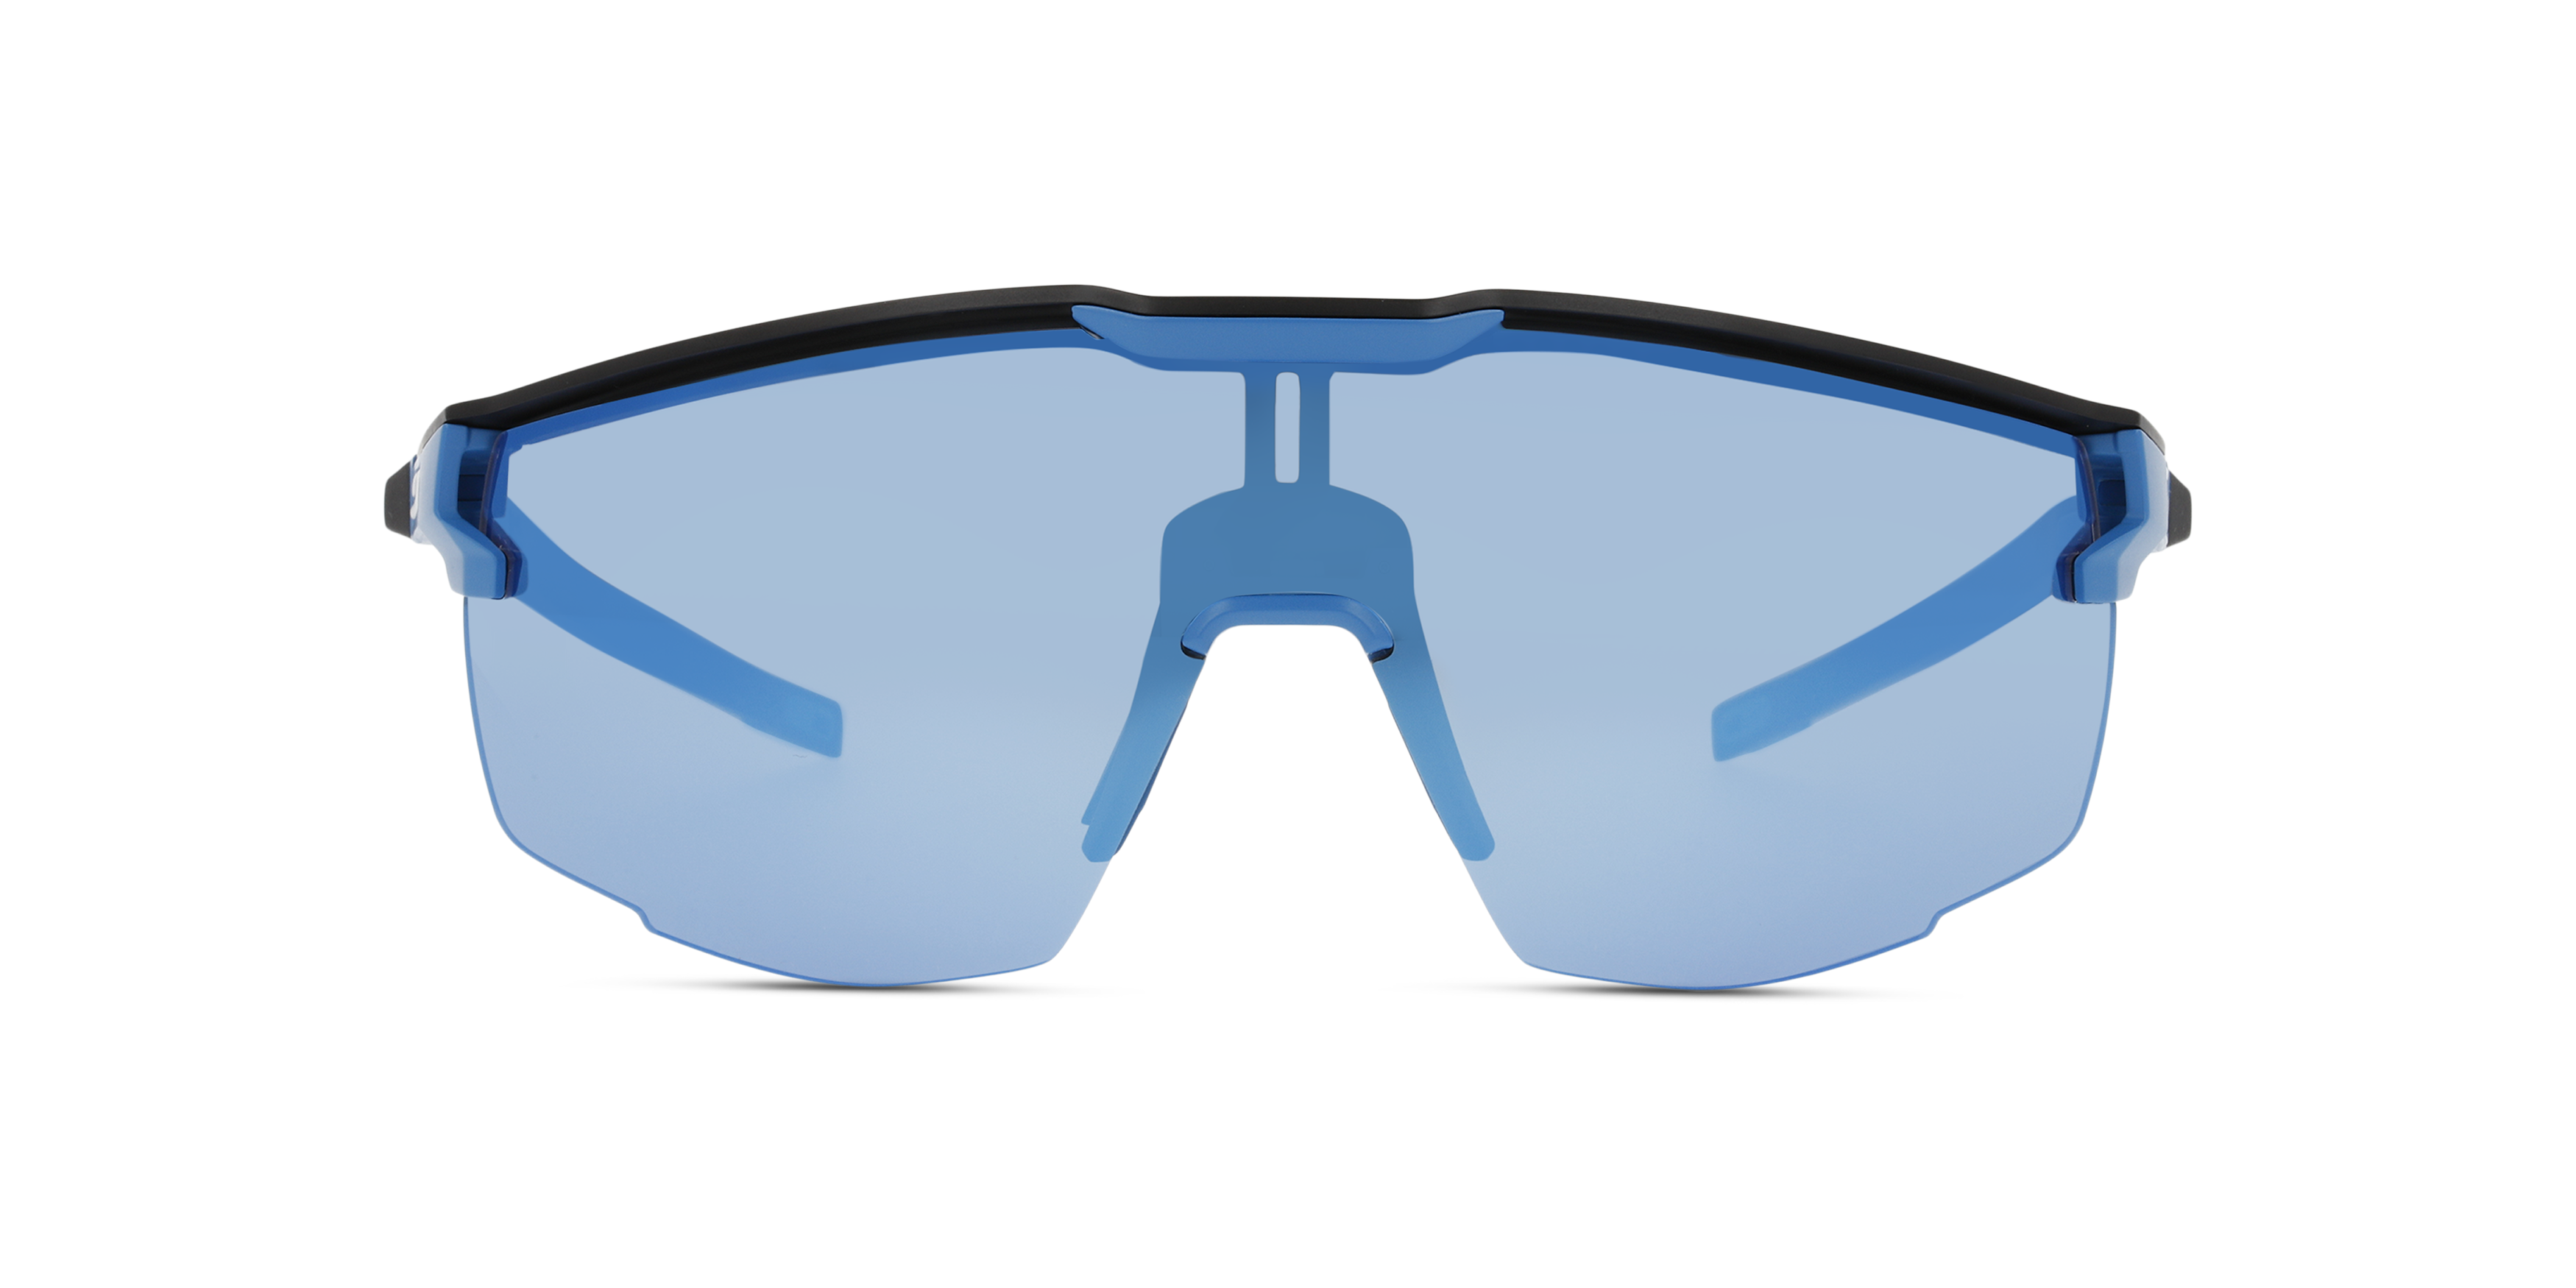 [products.image.front] Julbo J546 1132